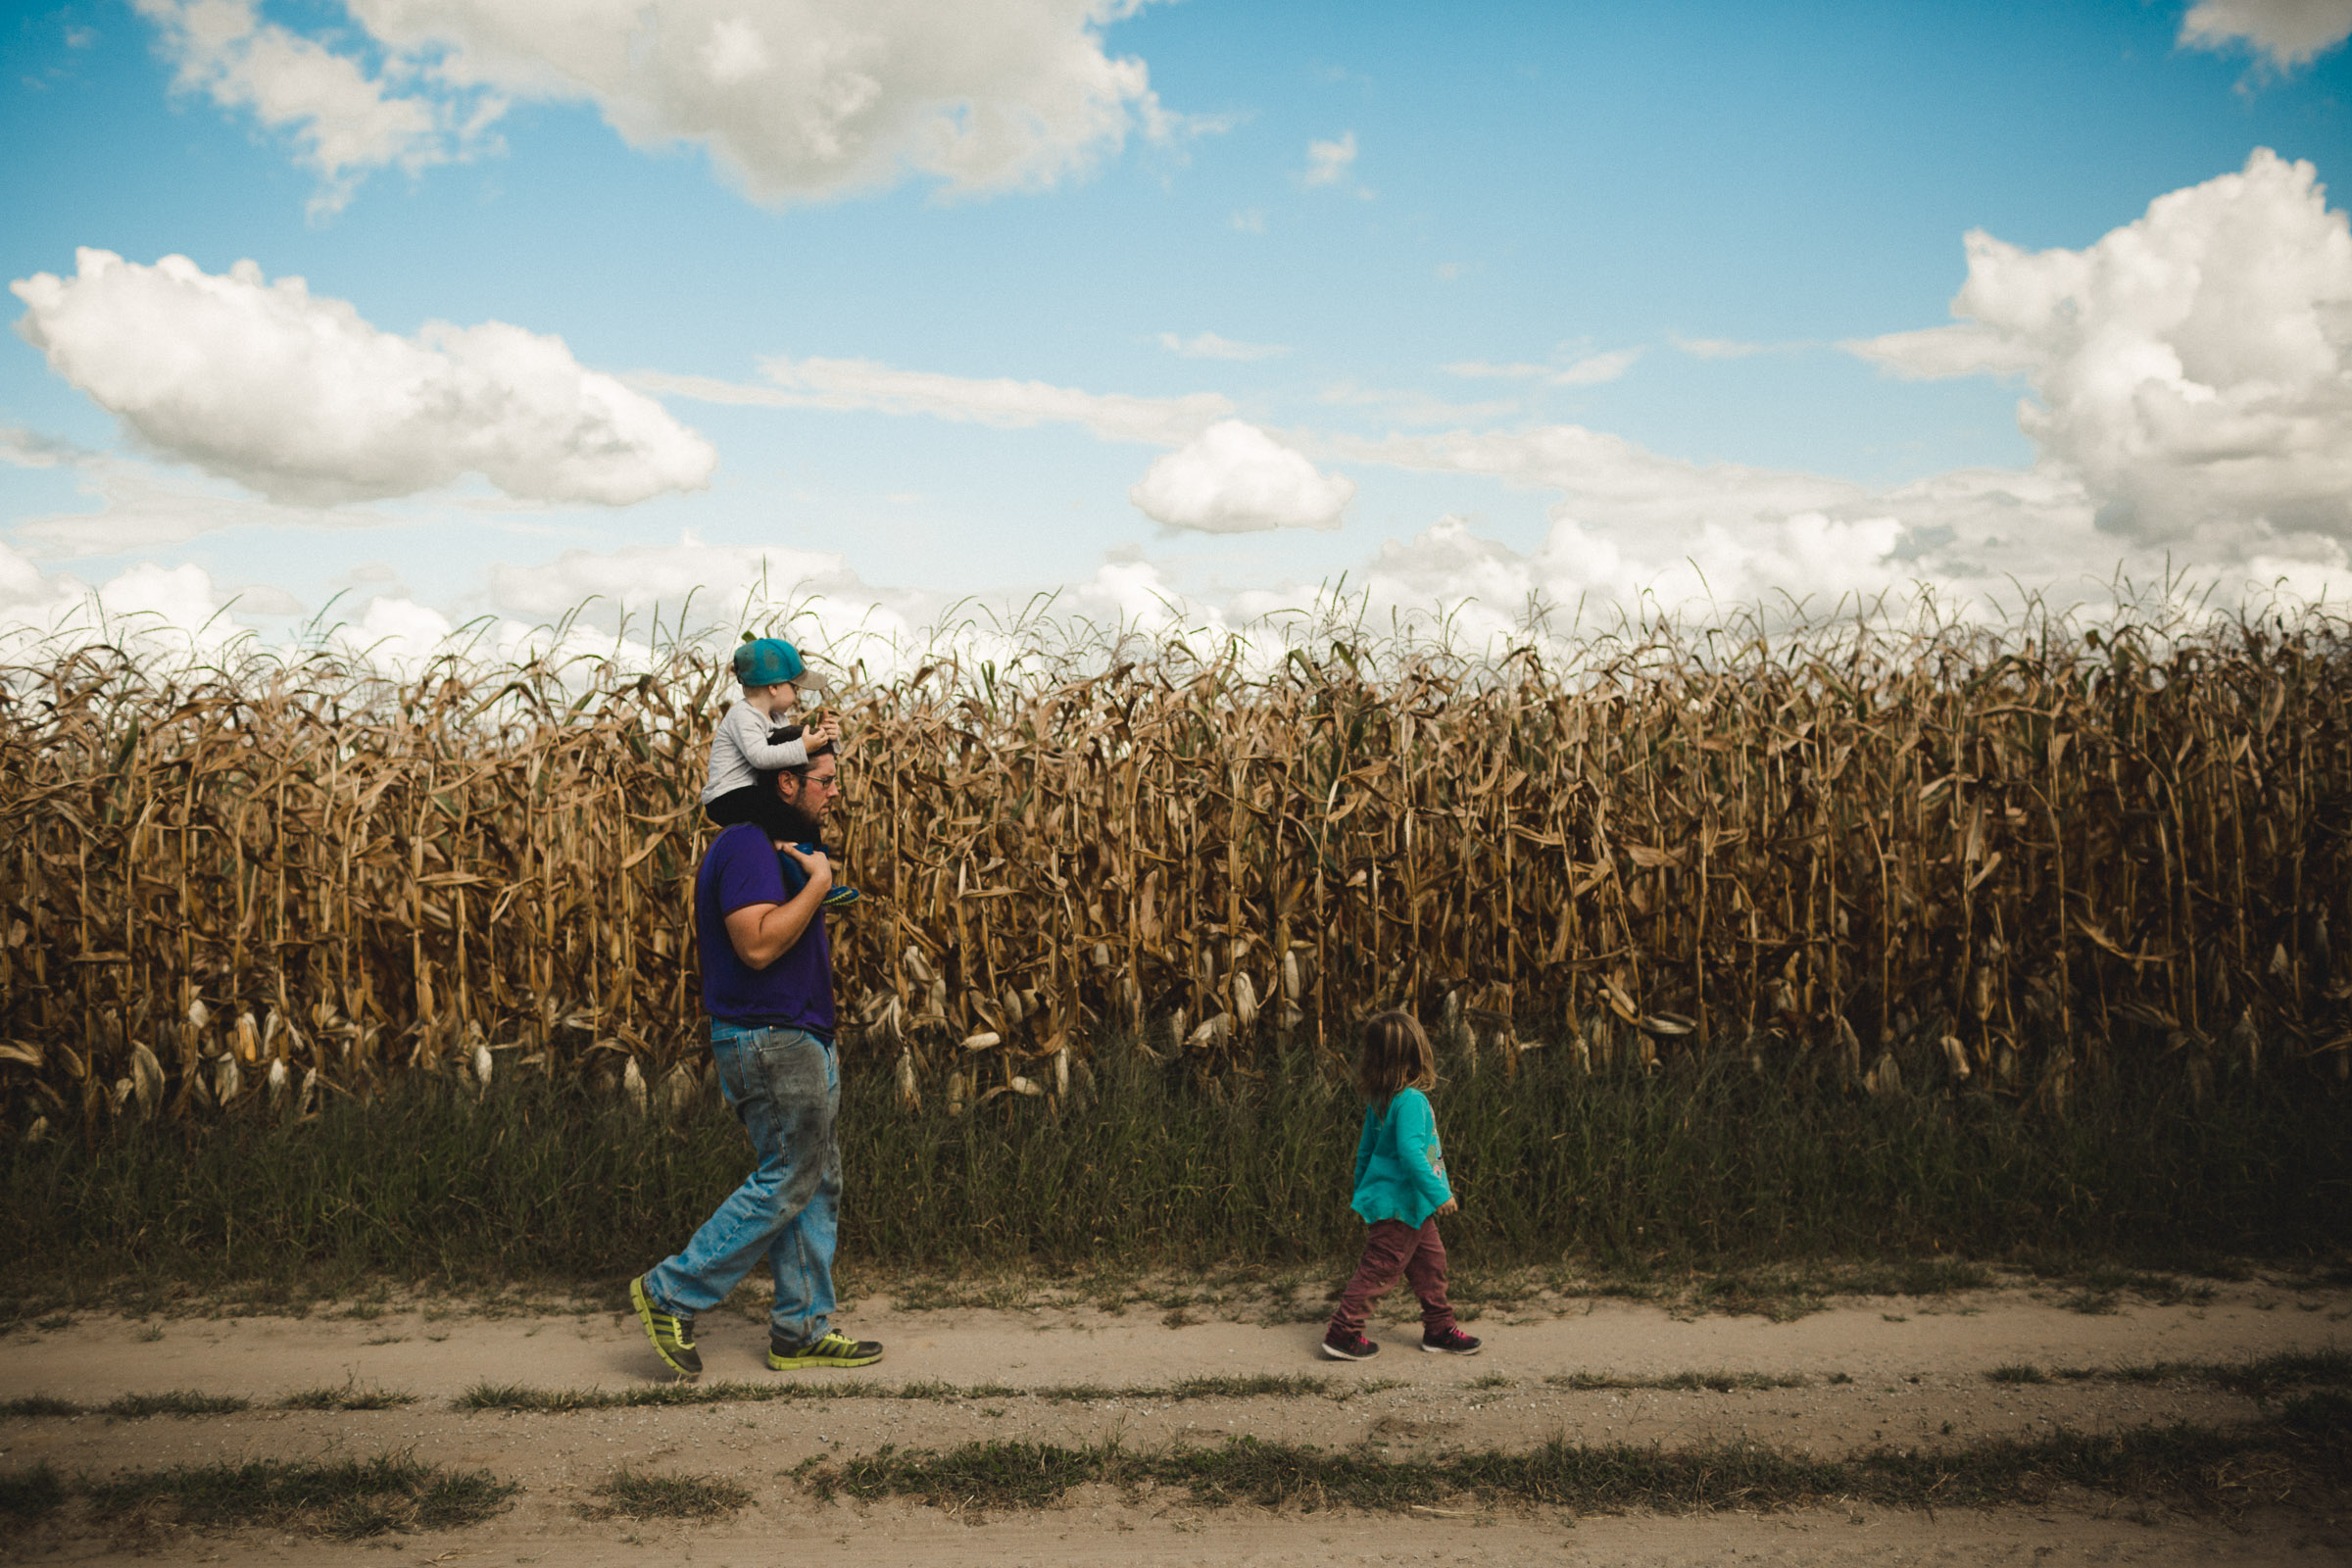 Family walking together along corn rows, with boy on dad's shoulders 